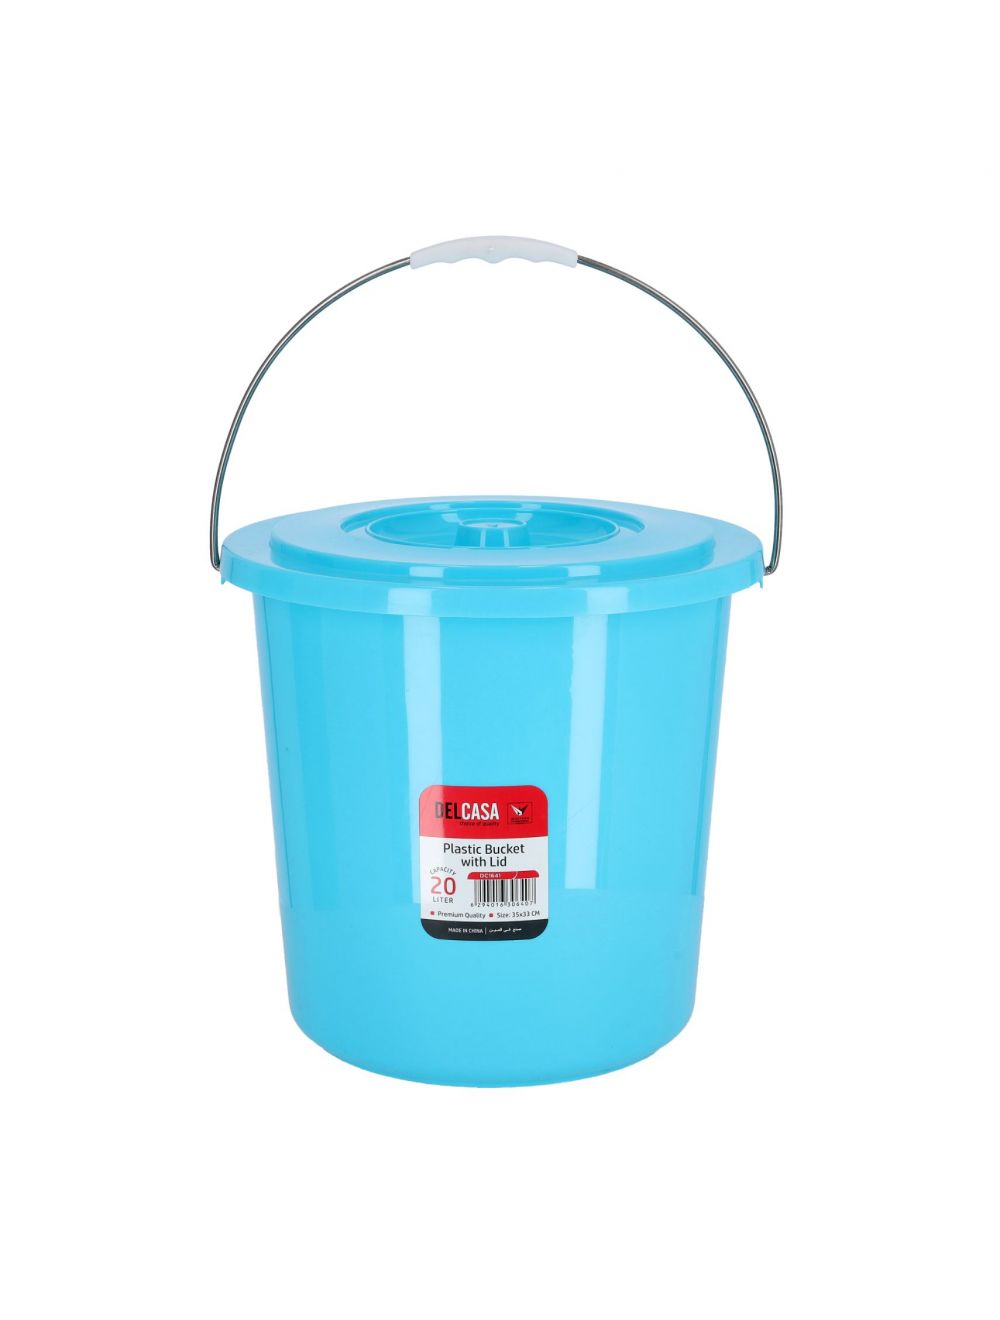 Delcasa 20Ltr Plastic Bucket with Lid - Strong Handle- Red- 20 Liter